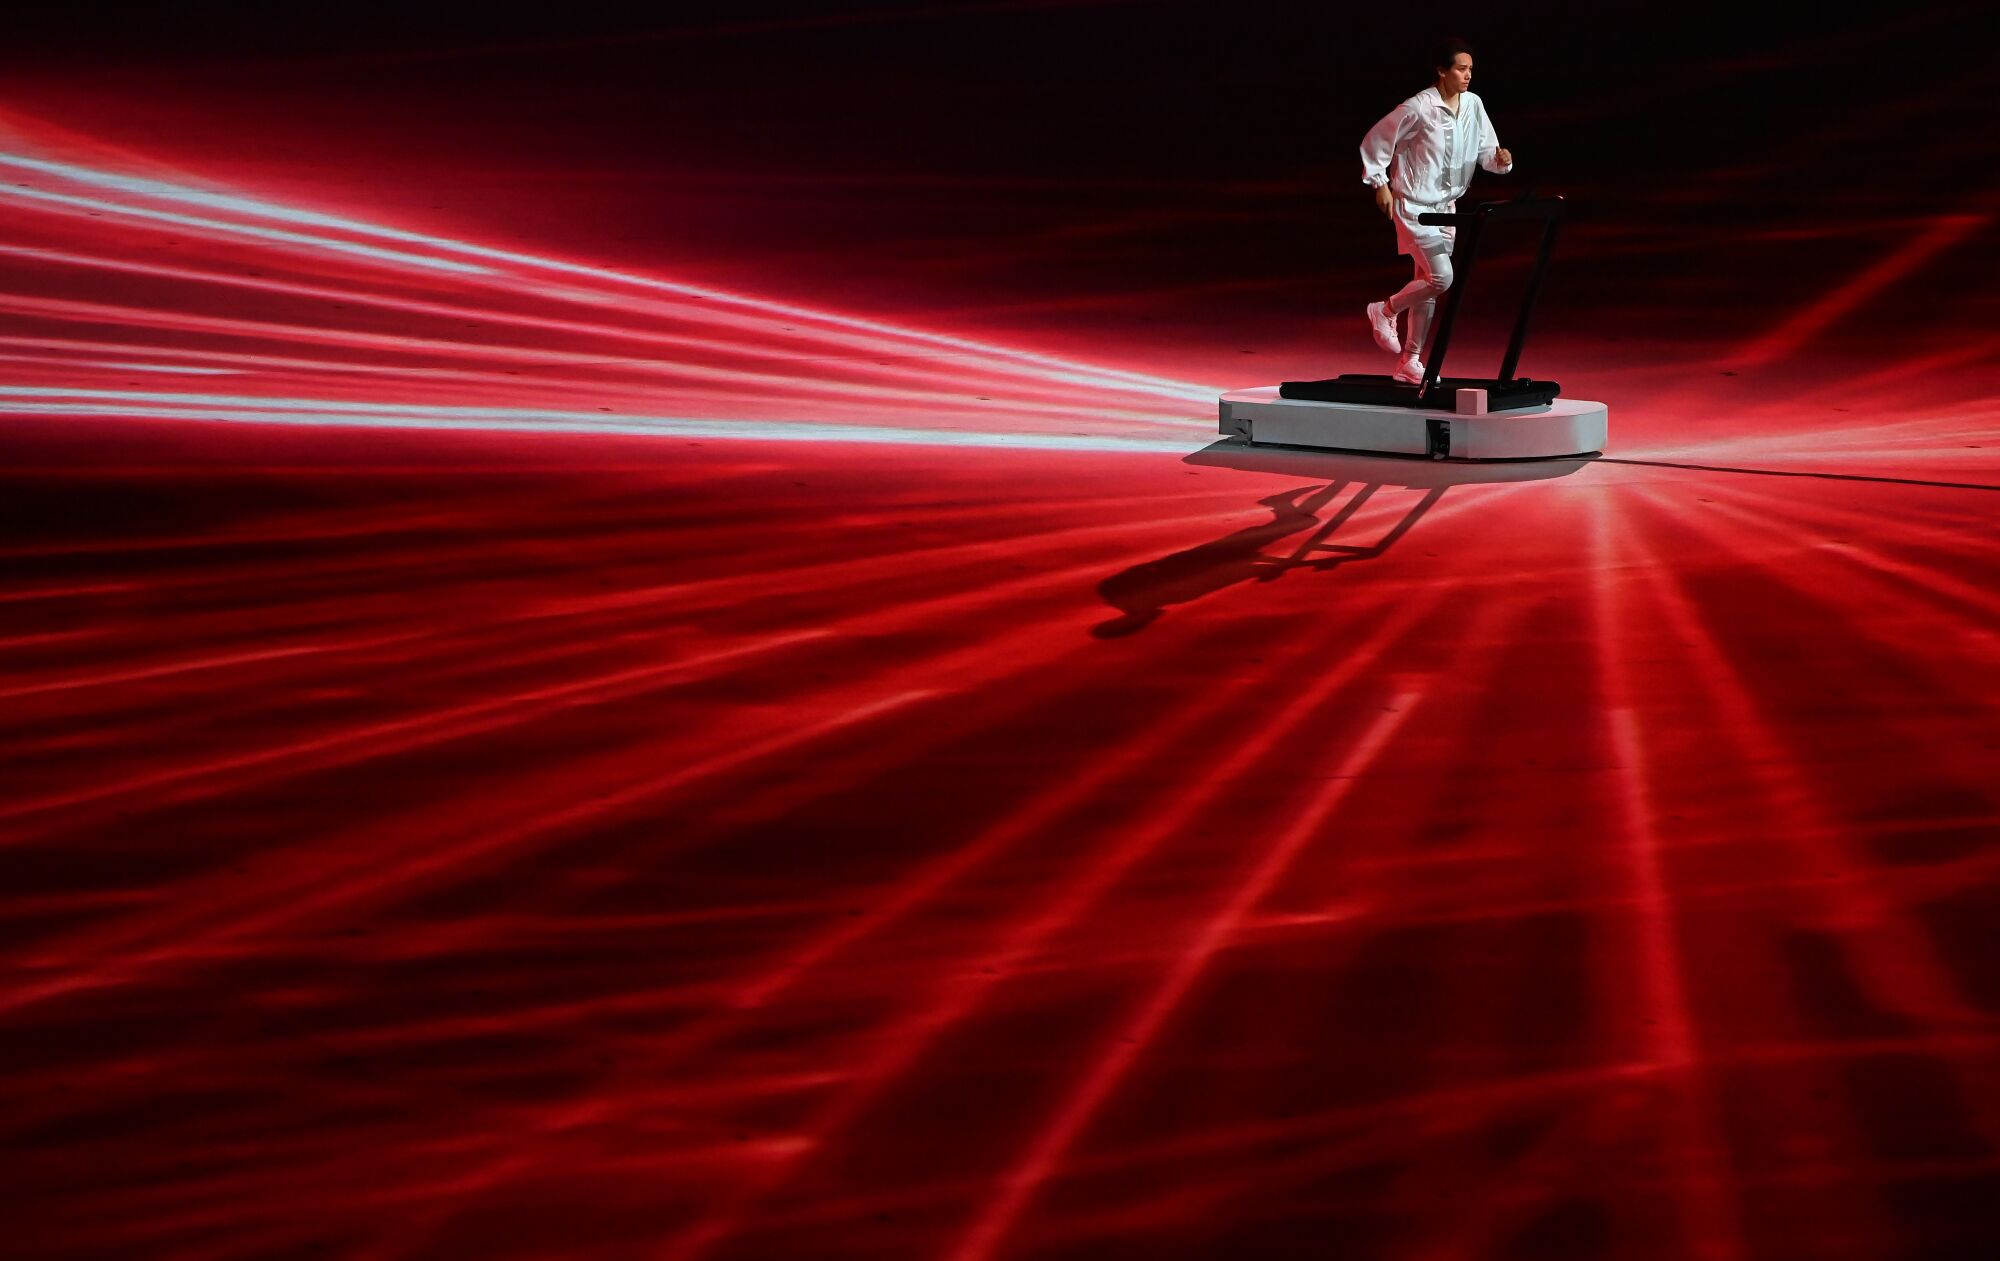 A man runs on a treadmill onstage surrounded by laser lights